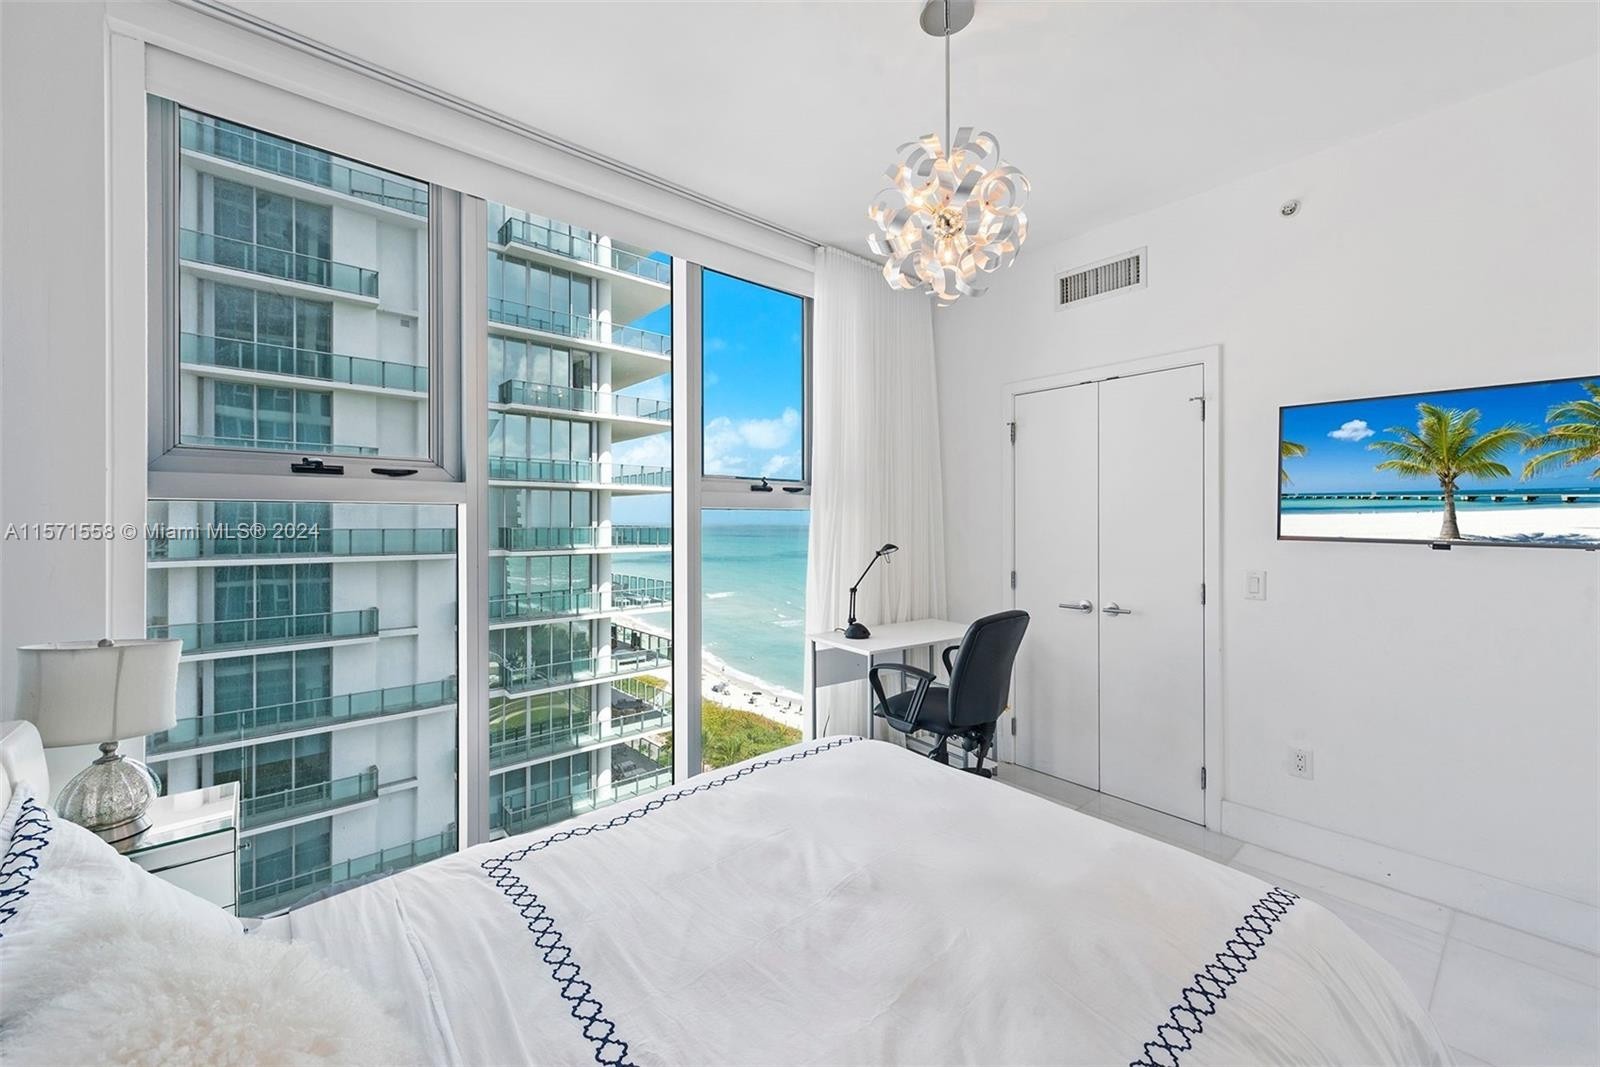 11. 6899 Collins Ave